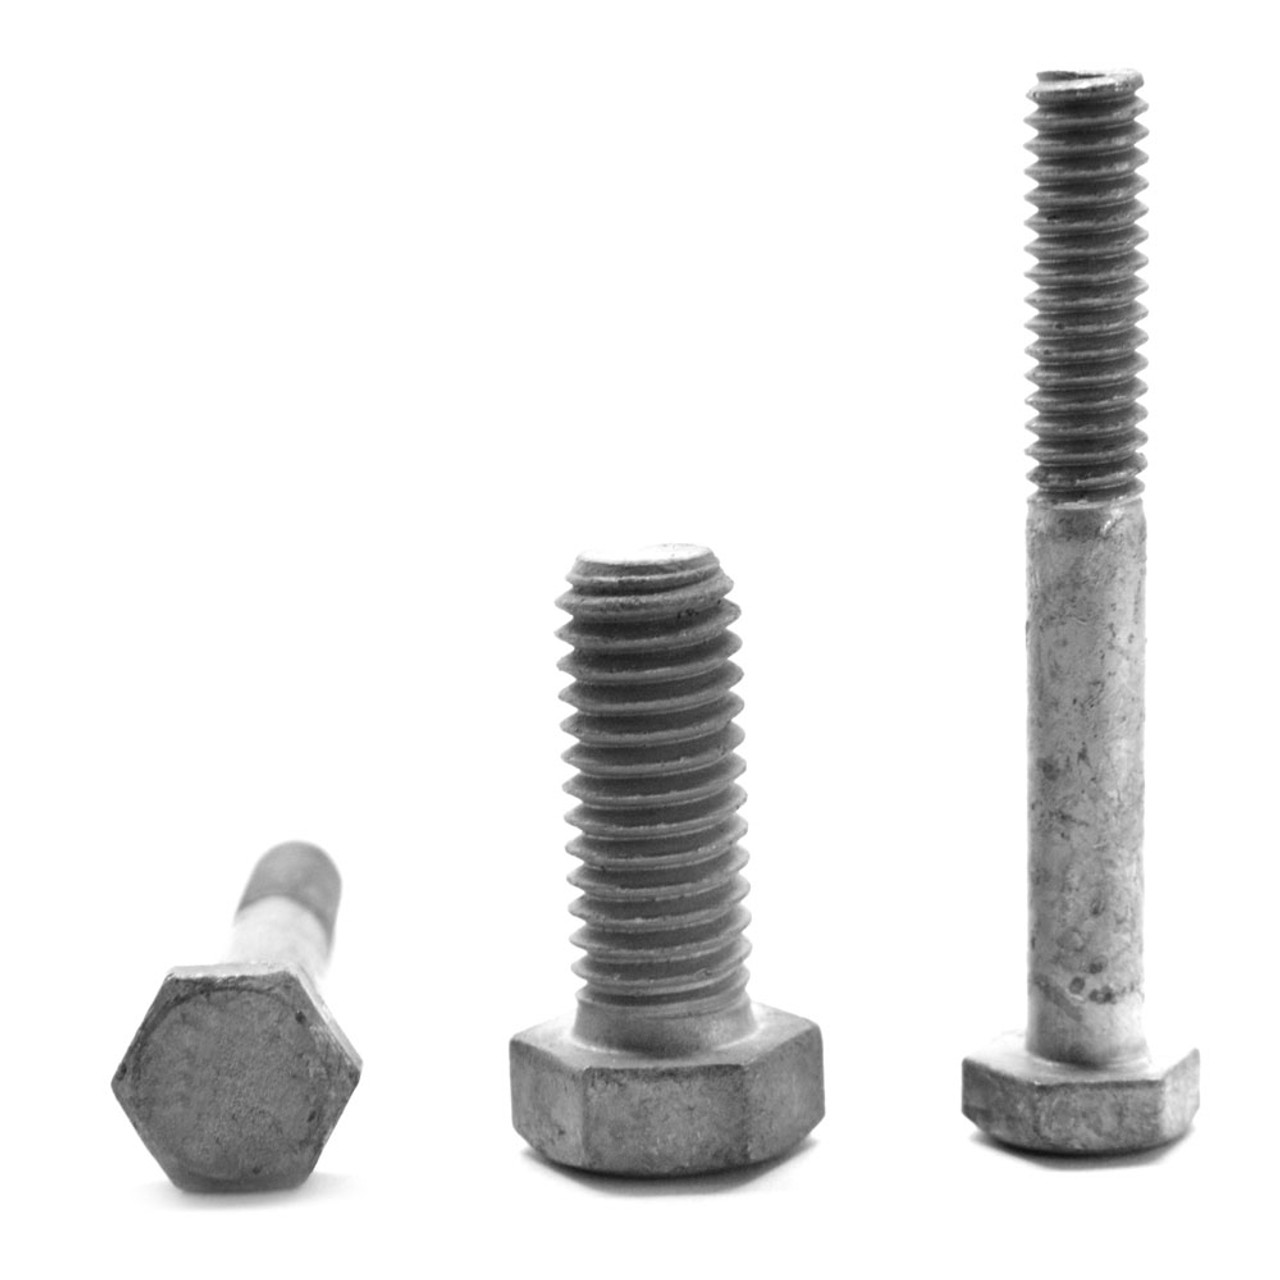 1/2"-13 x 22"6"THD UNDER-SIZED Coarse Thread A307 Grade A Hex Bolt Low Carbon Steel Hot Dip Galvanized